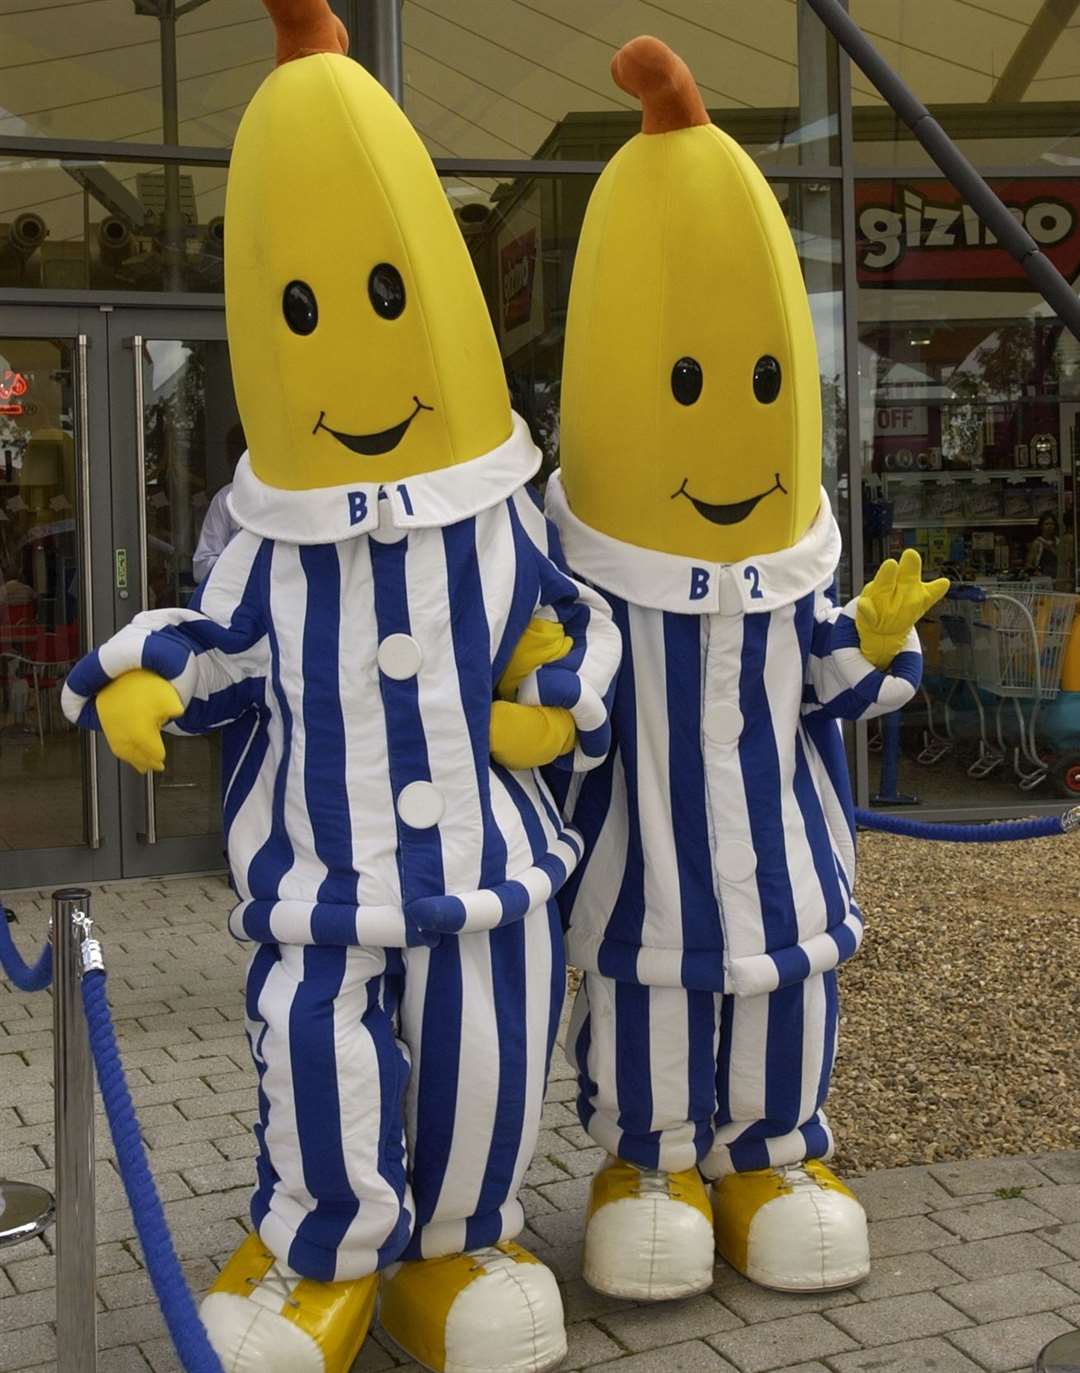 Bananas in Pyjamas at the outlet in 2002 - with gadget shop Gizmo pictured in the background